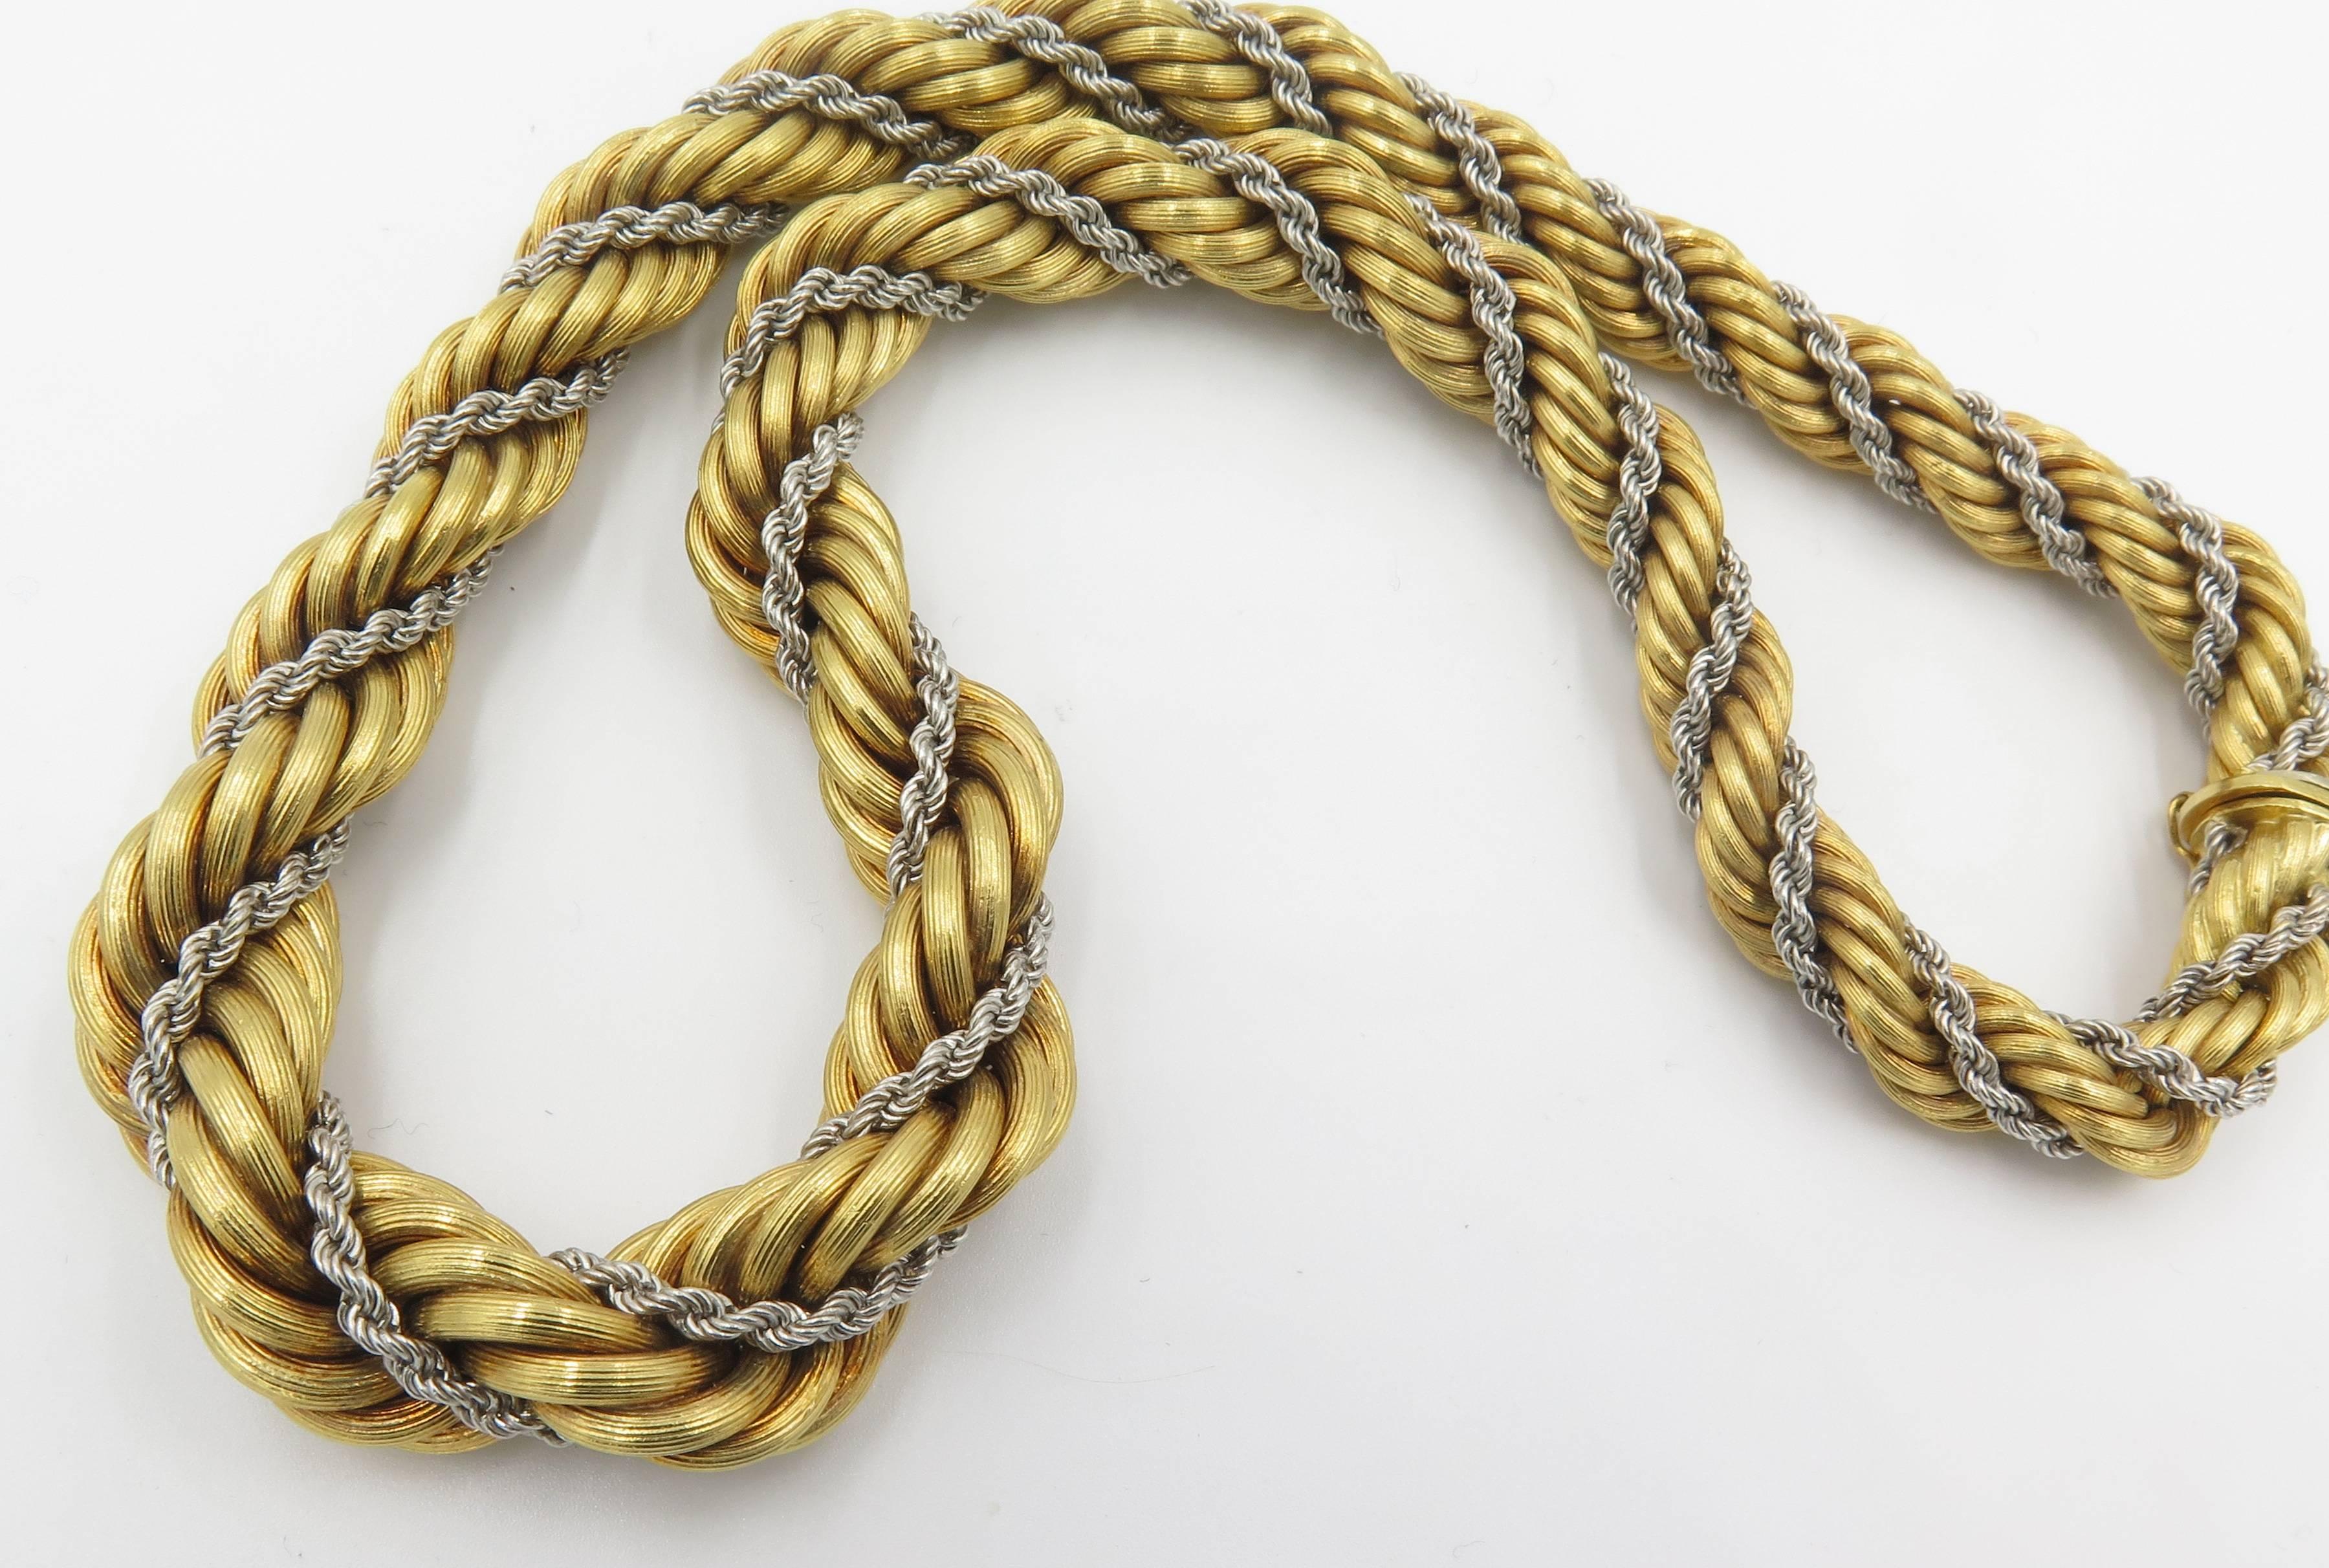 An 18 karat yellow and white gold rope necklace, Italian. Circa 1960. Designed as a graduated yellow gold rope, enhanced by white gold rope detail. Length is 17 1/2 inches. Gross weight is approximately 89.0 grams. Signed Italy, 18K.